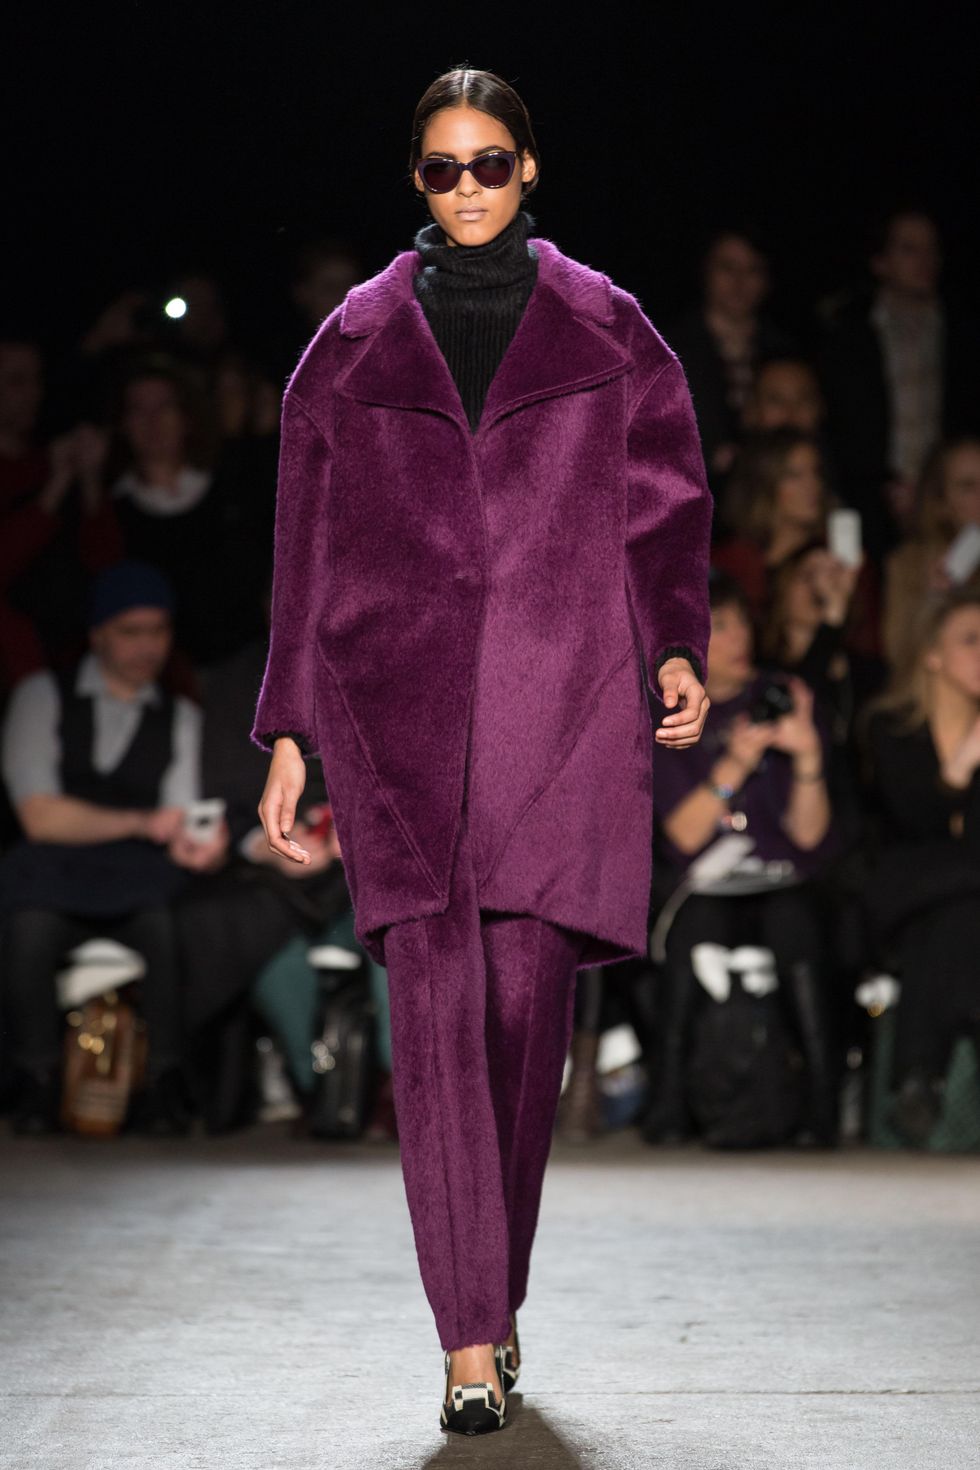 Christian Siriano fall collection look 3